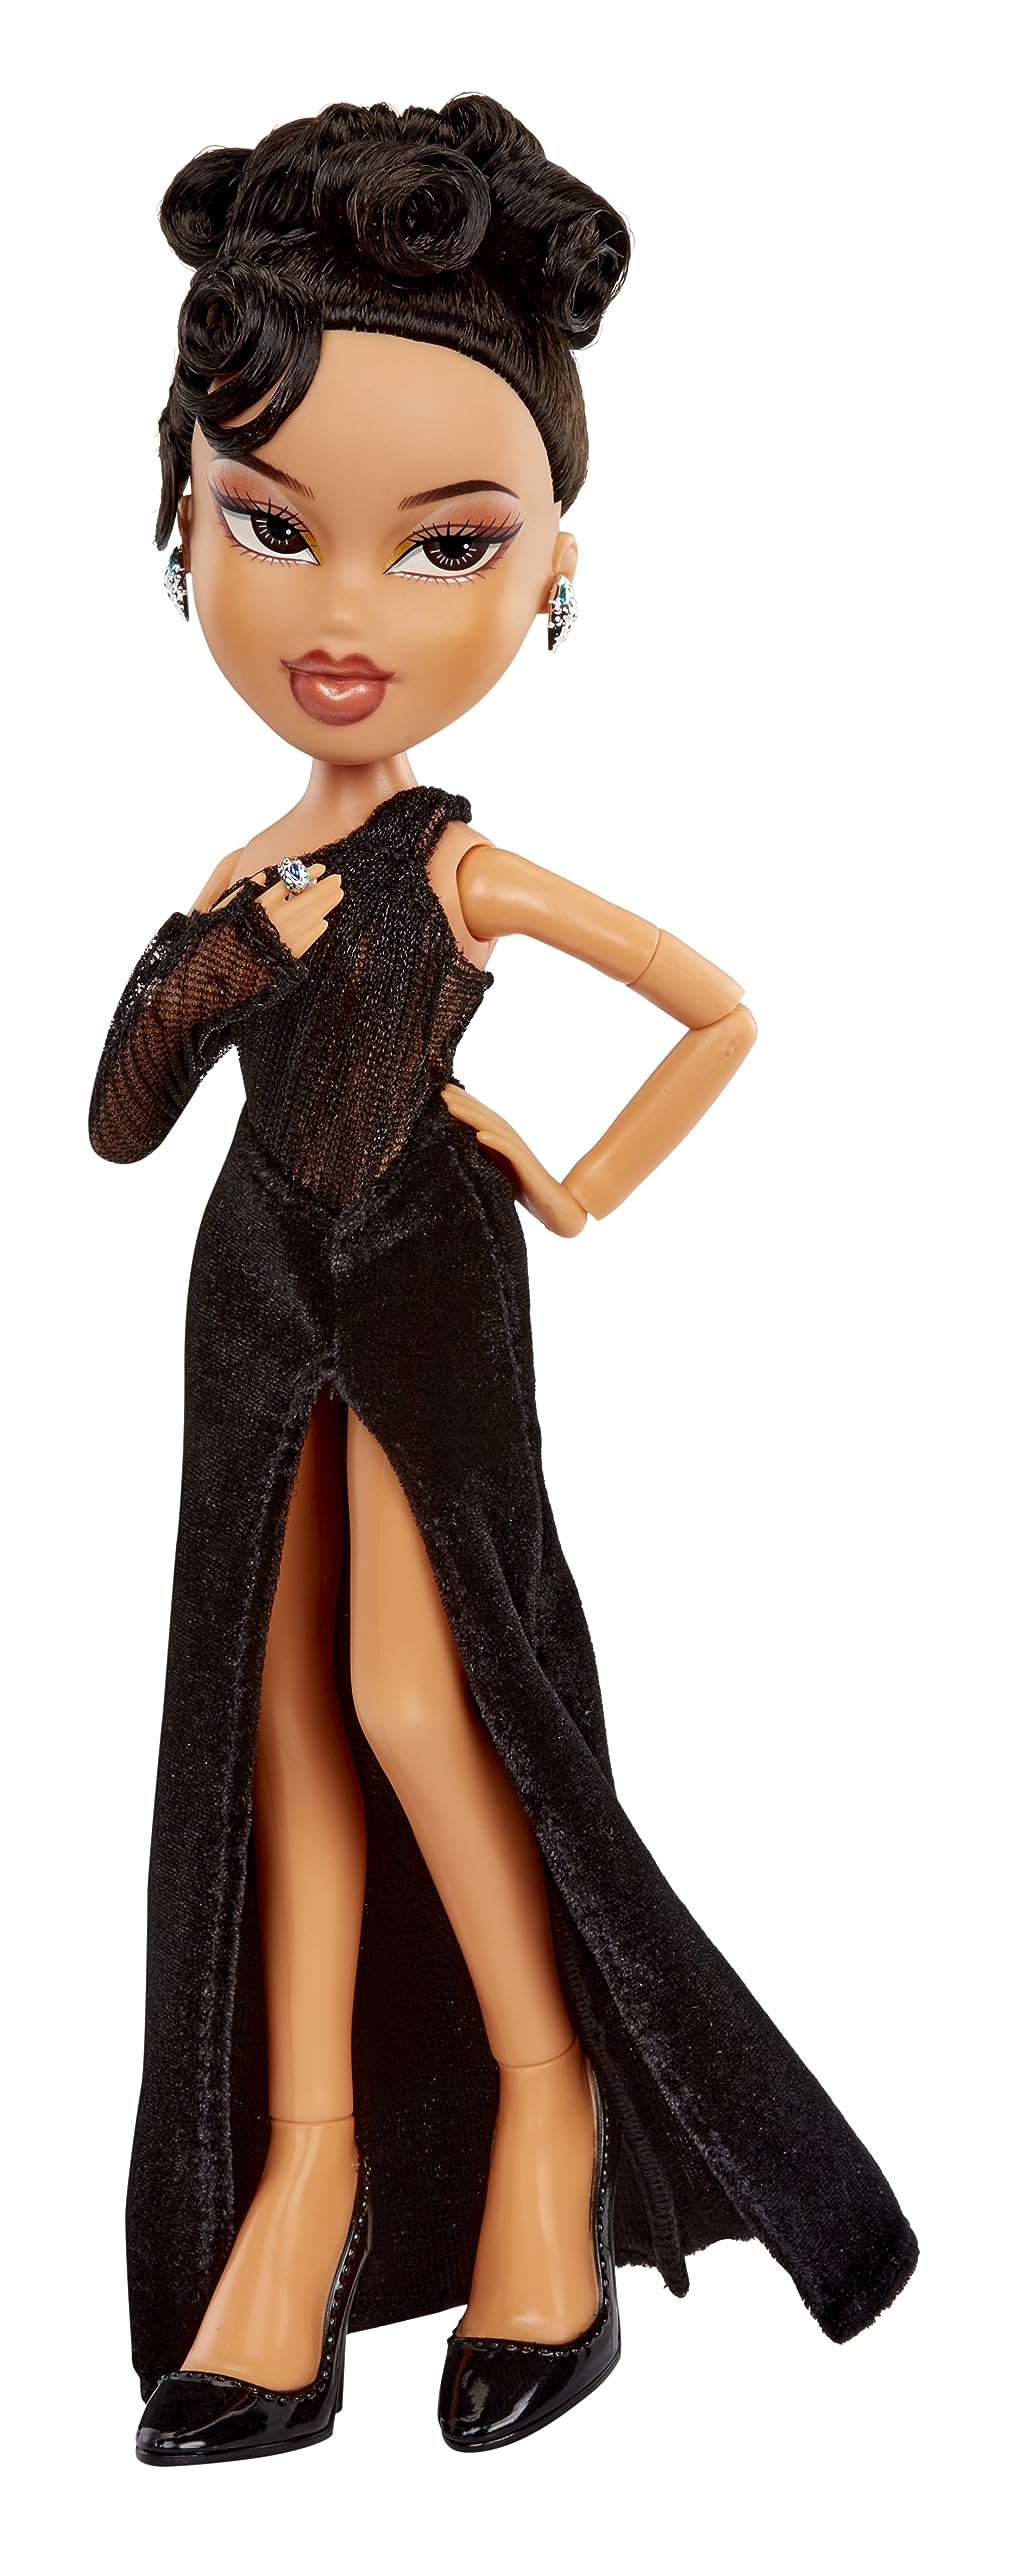 Bratz x Kylie Jenner Night Fashion Doll with Evening Gown, Pet Dog, and Poster